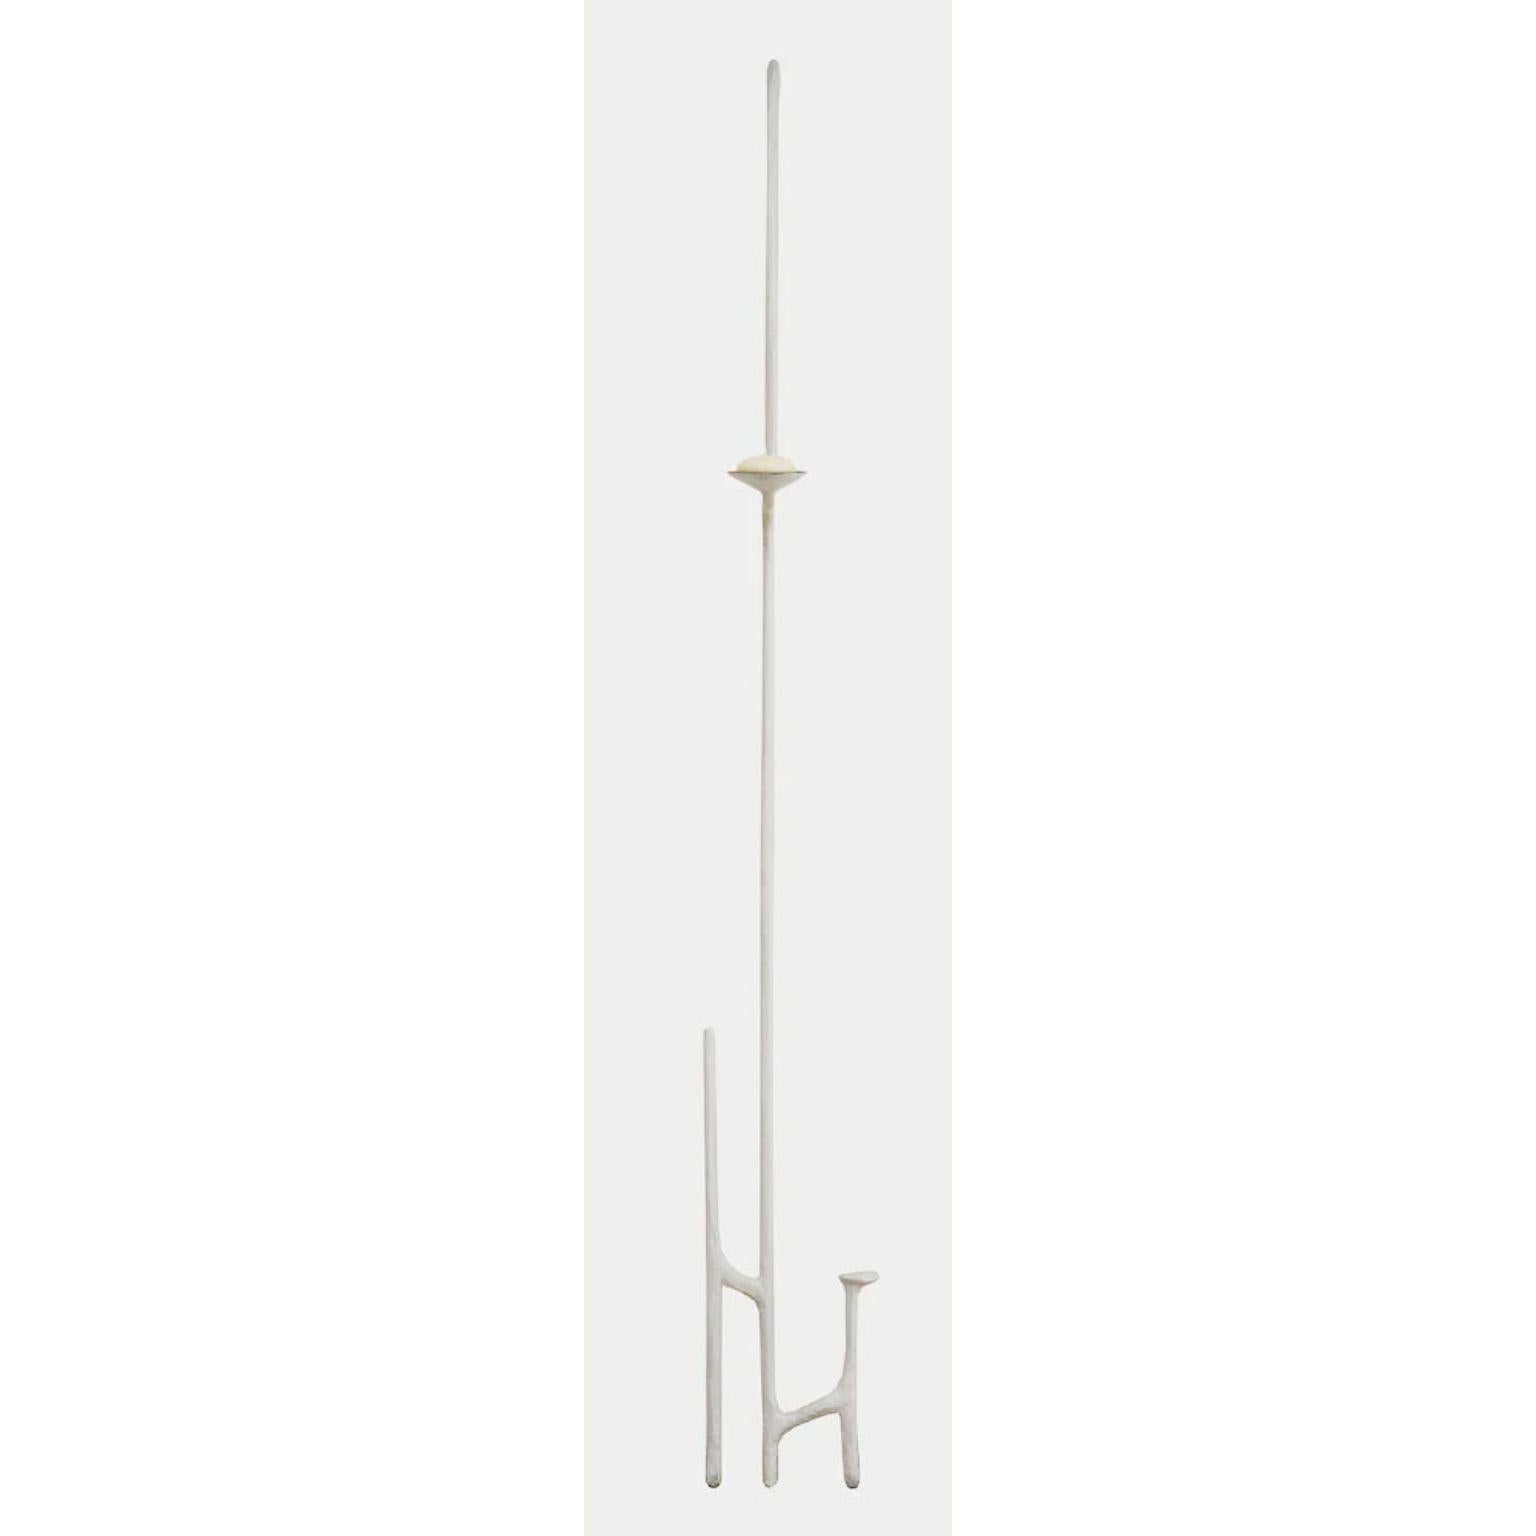 Giacometti White Bronze Leaning Candlestick by Mary Brōgger
Dimensions: W 33 cm x D 5 cm x H 196 cm.
Materials: white patinated bronze.
Also available in other finishes and dimensions.

Mary Brōgger is an internationally recognized artist whose